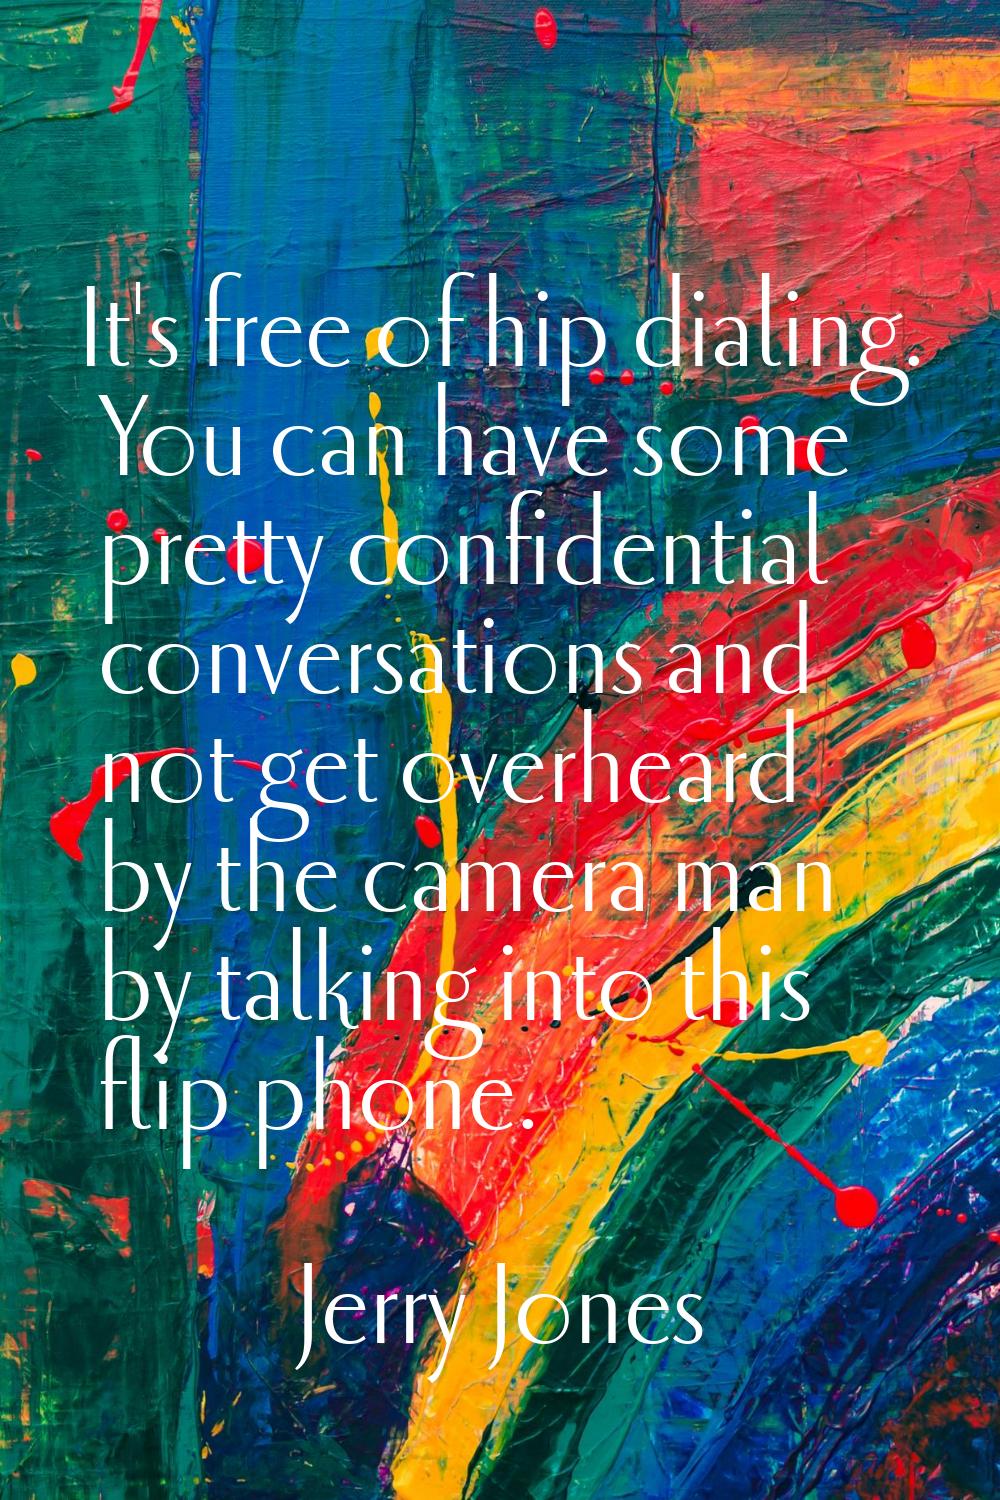 It's free of hip dialing. You can have some pretty confidential conversations and not get overheard